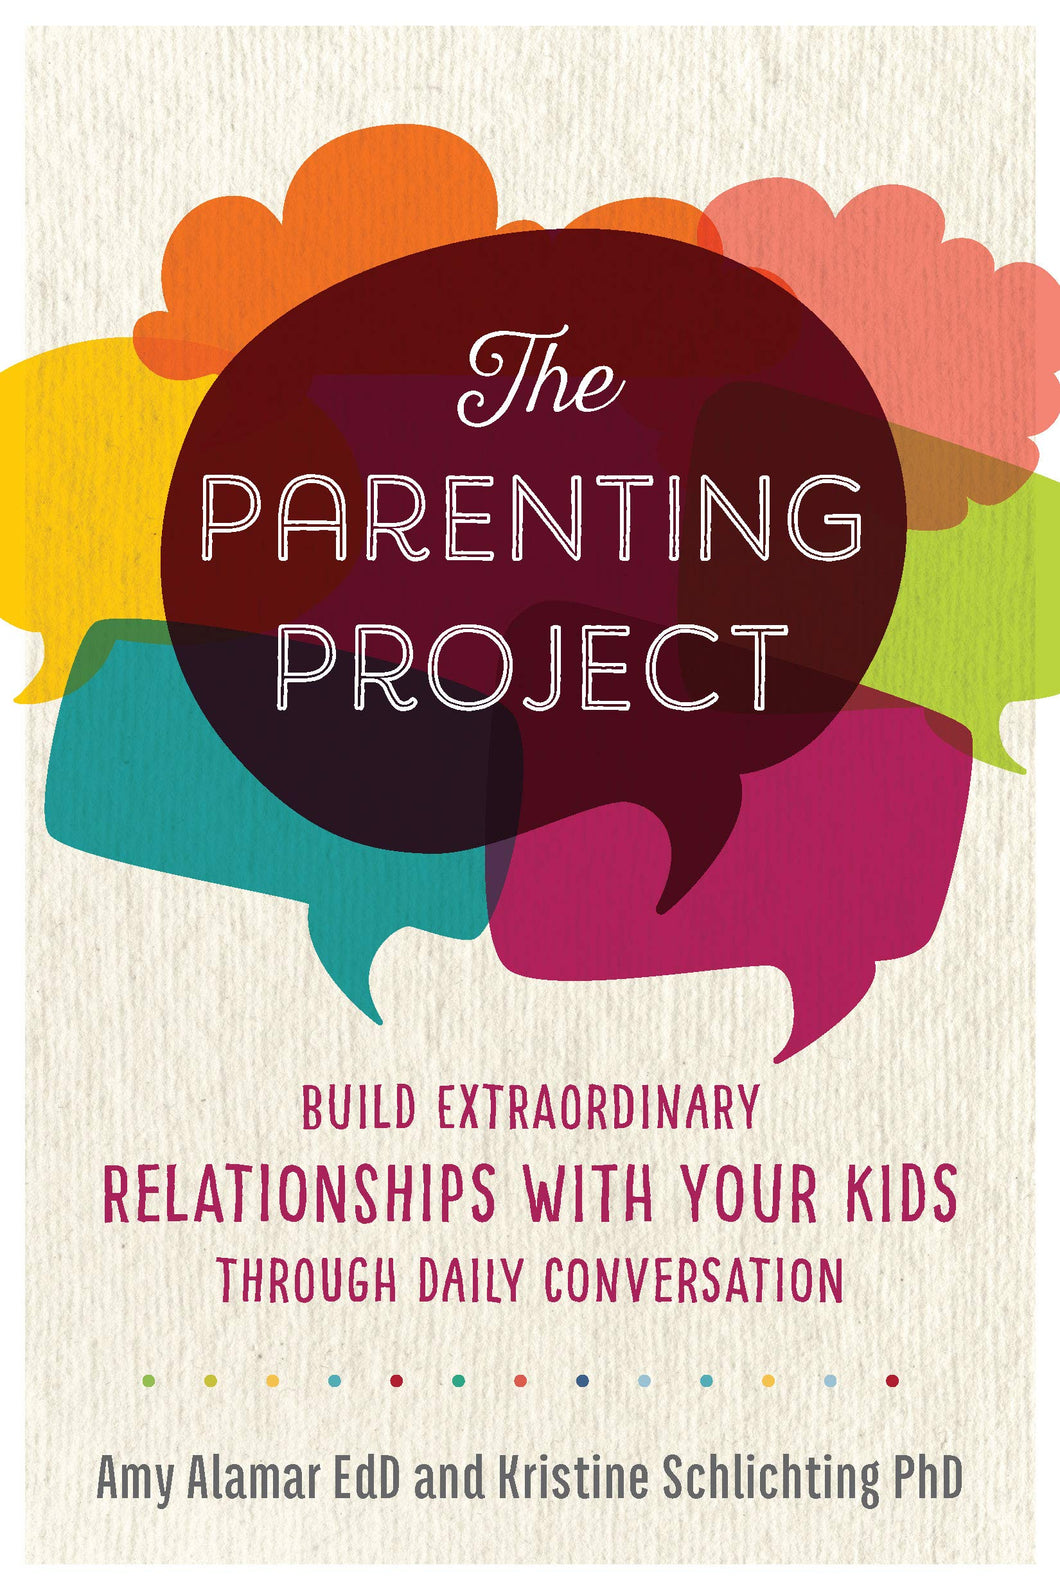 The Parenting Project: Build Extraordinary Relationships With Your Kids Through Daily Conversation by Amy Alamar